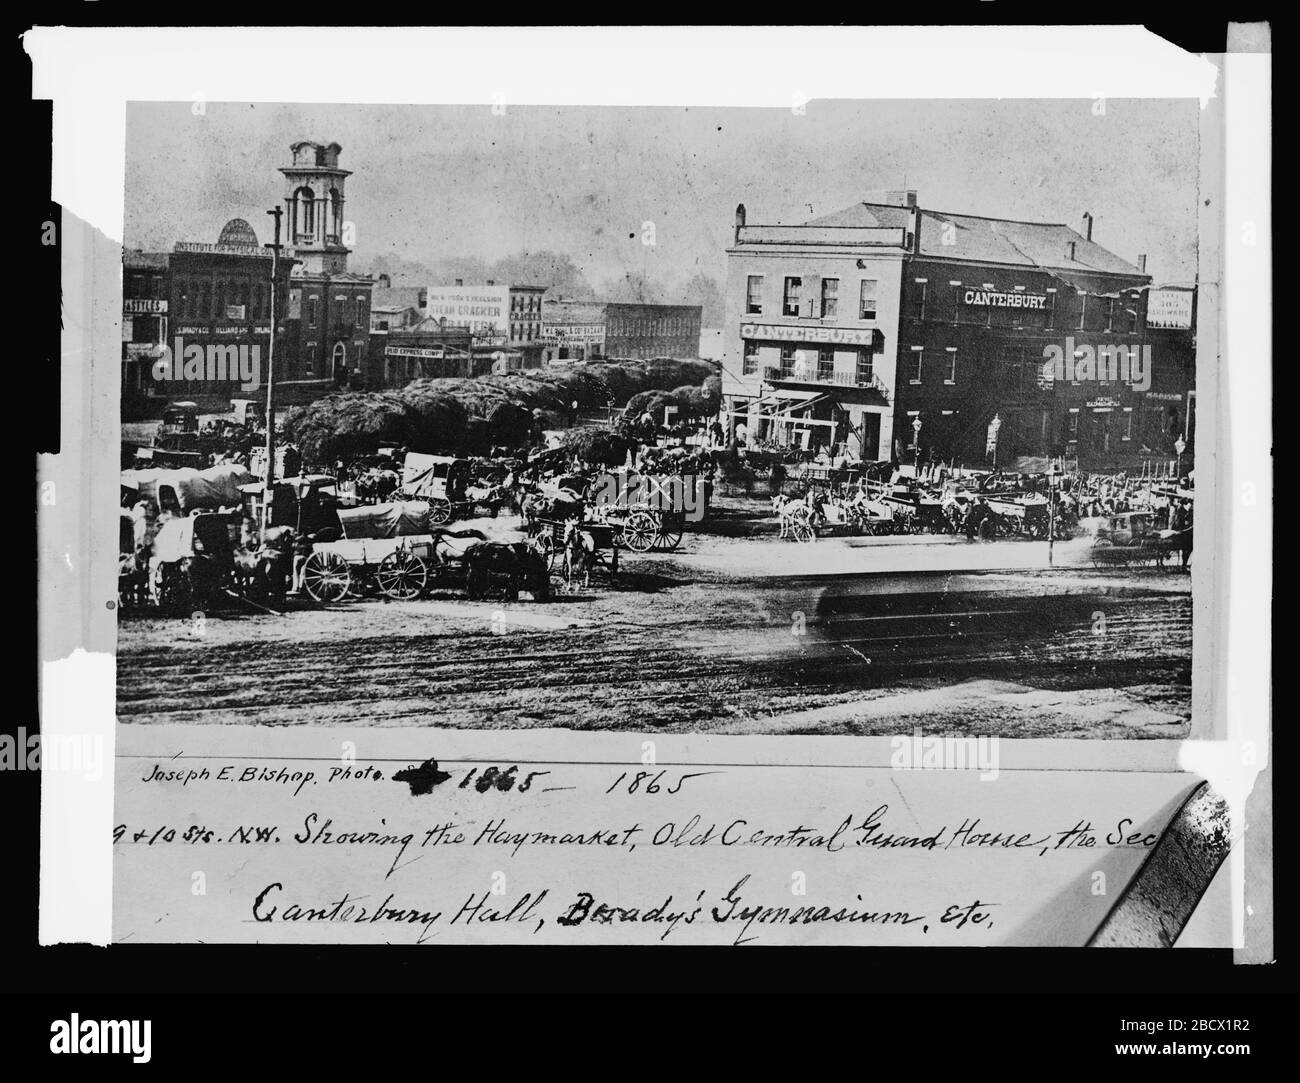 'English: Title: 9 & 10 Sts., N.W., showing the Haymarket, Old Central Guard House, the sec [...], Canterbury Hall, Brady's Gymnasium, etc., [Washington, D.C.] Abstract/medium: 1 negative : glass ; 8 x 6 in.; between 1921 and 1922 date QS:P,+1921-00-00T00:00:00Z/8,P1319,+1921-00-00T00:00:00Z/9,P1326,+1922-00-00T00:00:00Z/9; Library of Congress  Catalog: http://lccn.loc.gov/2016824057 Image download: http://cdn.loc.gov/service/pnp/npcc/30300/30381v.jpg Original url: https://www.loc.gov/pictures/item/2016824057/; National Photo Company Collection; ' Stock Photo